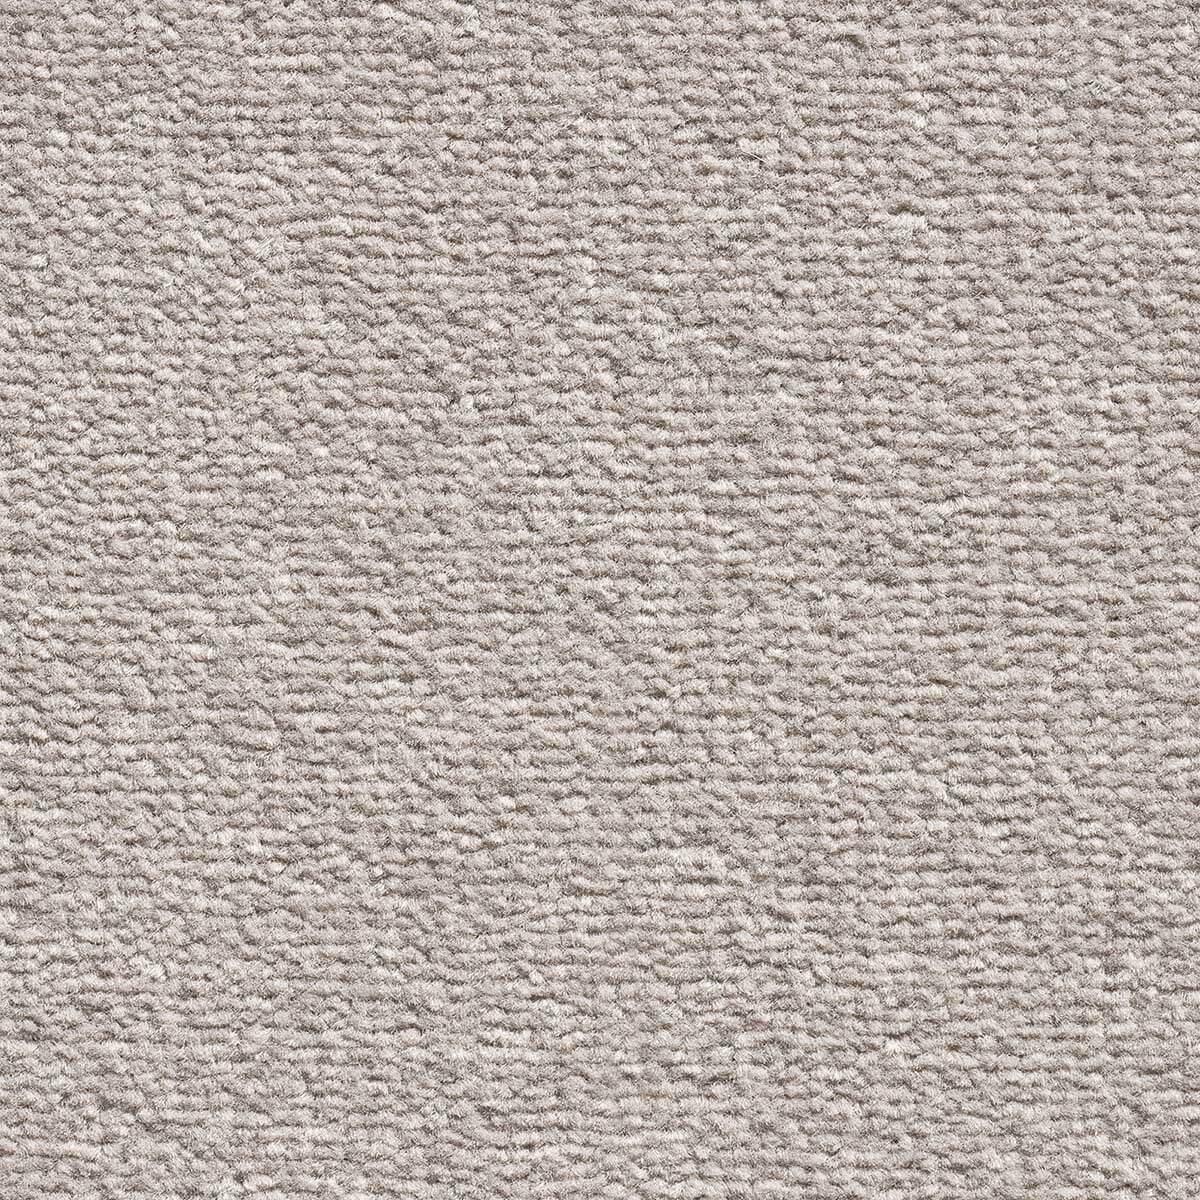 Haute Couture Twist Carpet - 5172 Smoked Taupe